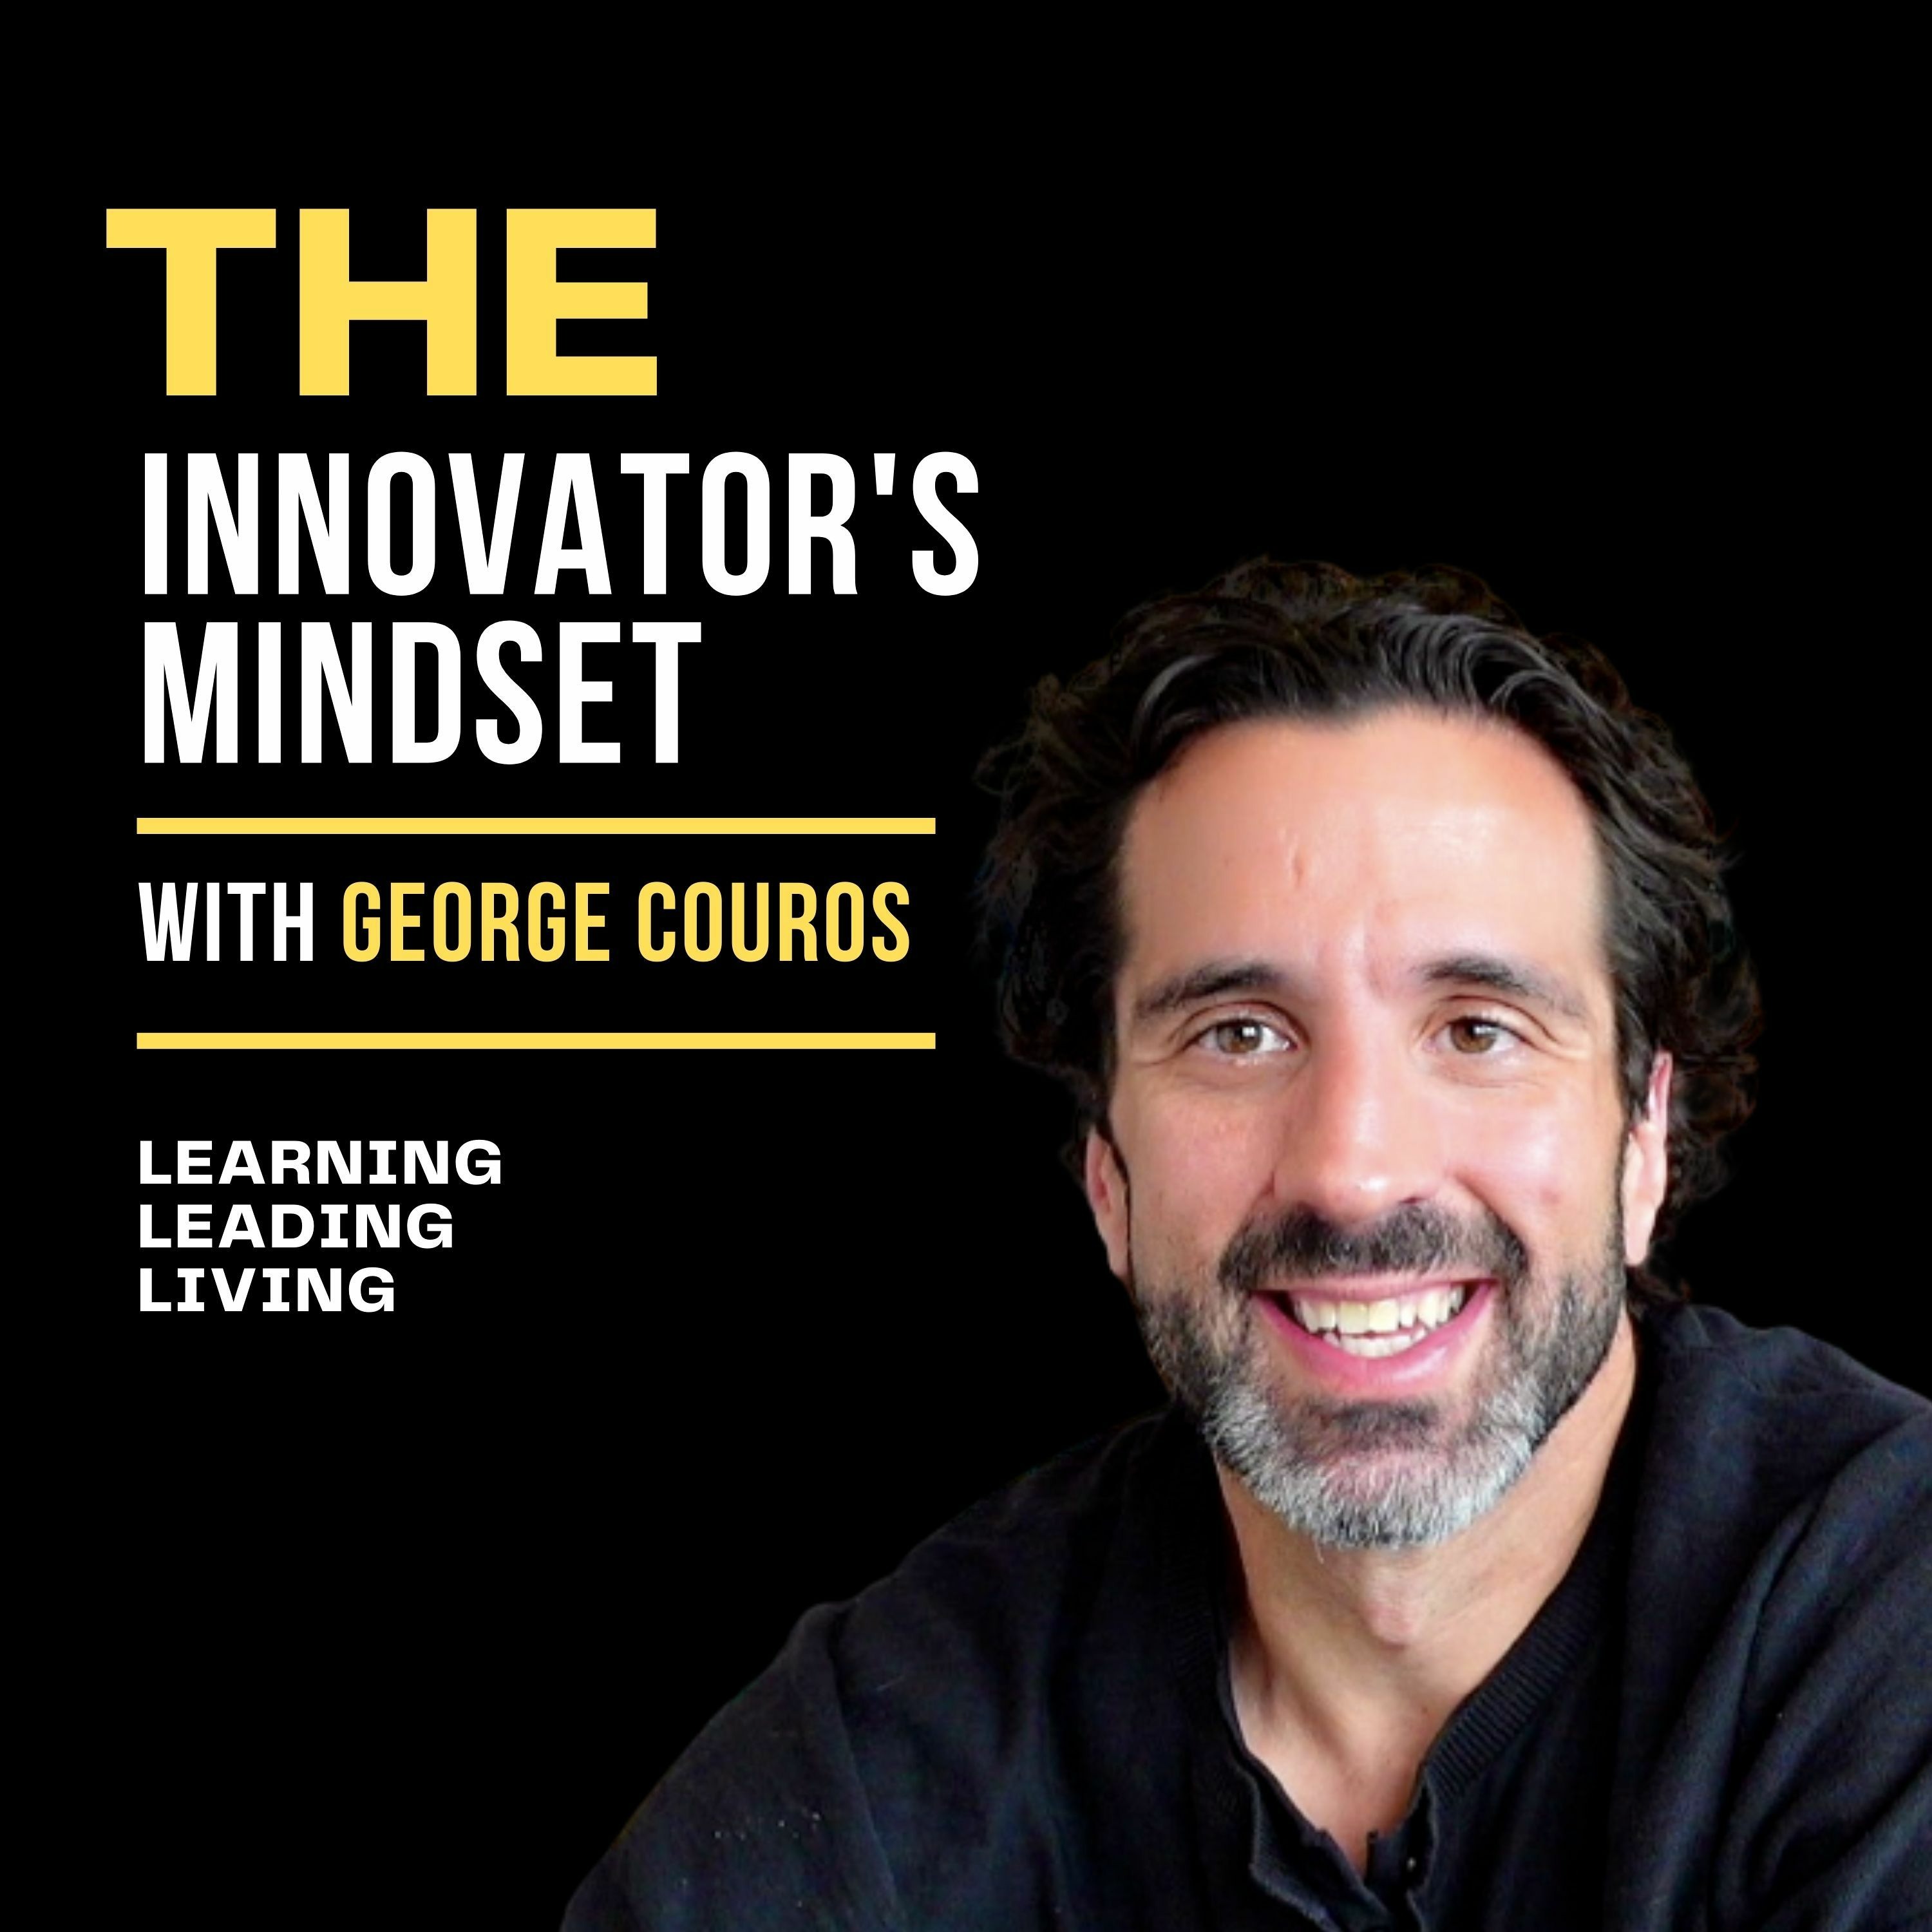 3 Questions on Educators that Inspire with Taylor Teamann - The #InnovatorsMindset #Podcast